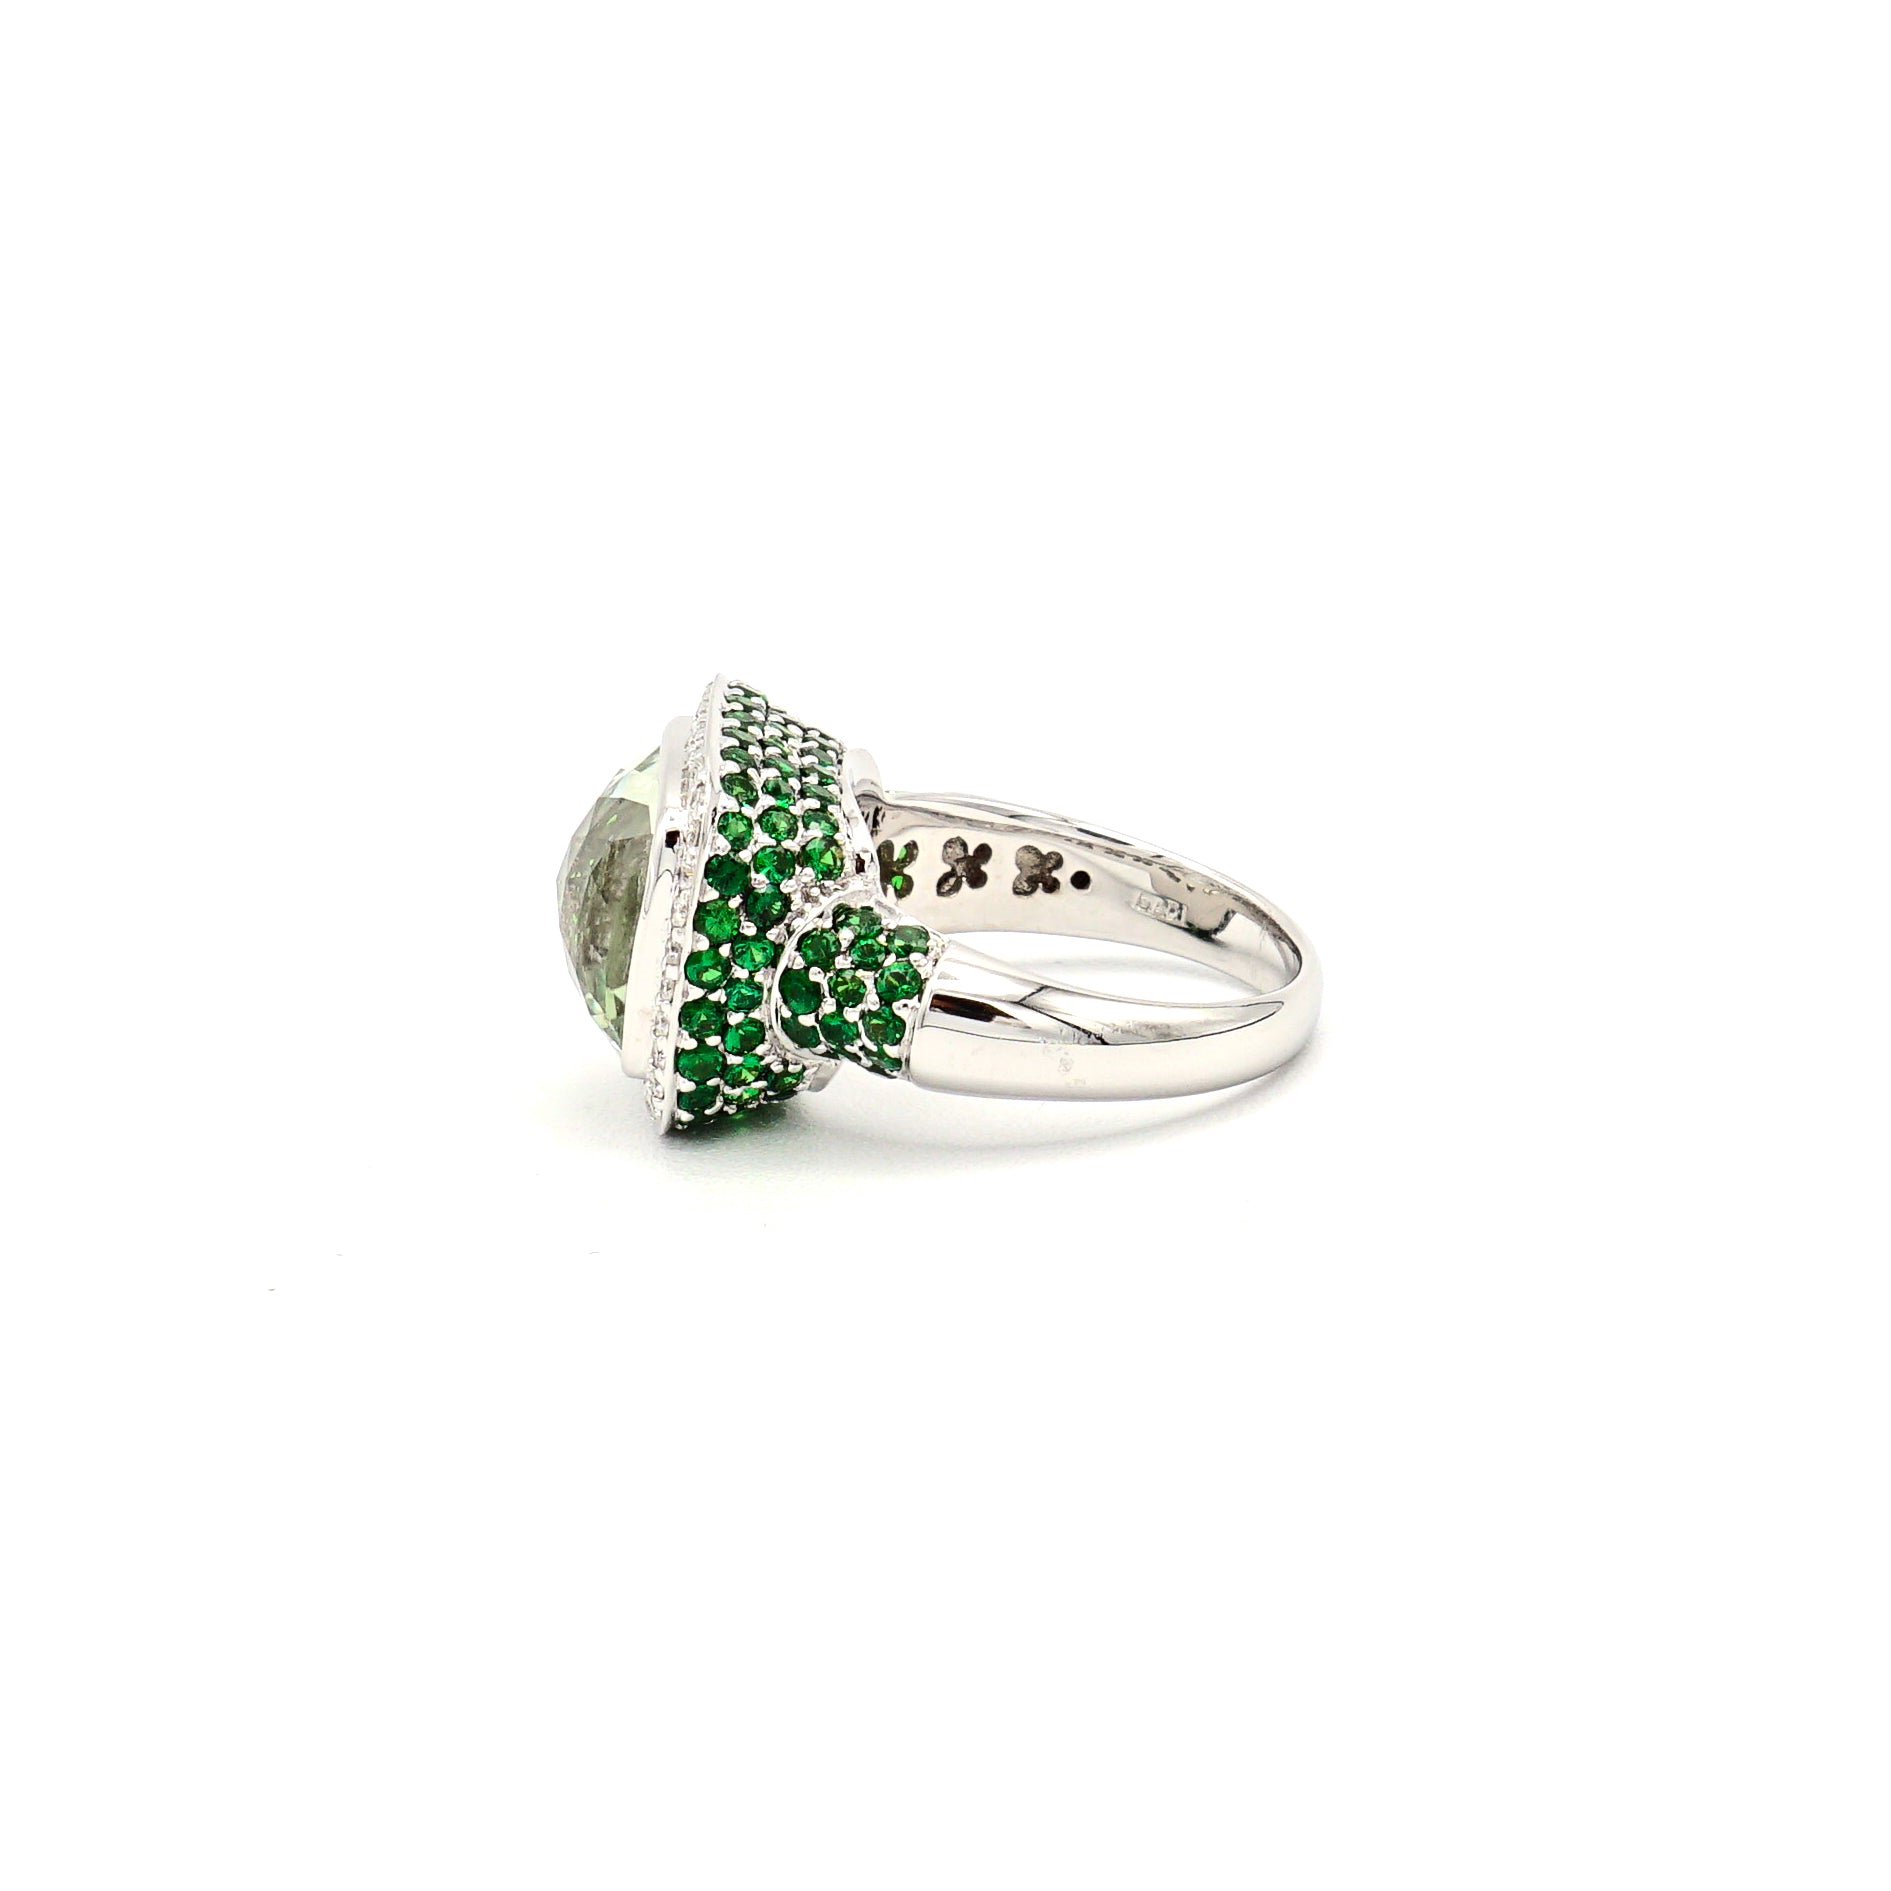 18k White Gold Prasiolite (Green Amethyst) With Diamonds and Tsavorite - Le Vive Jewelry in Riverside